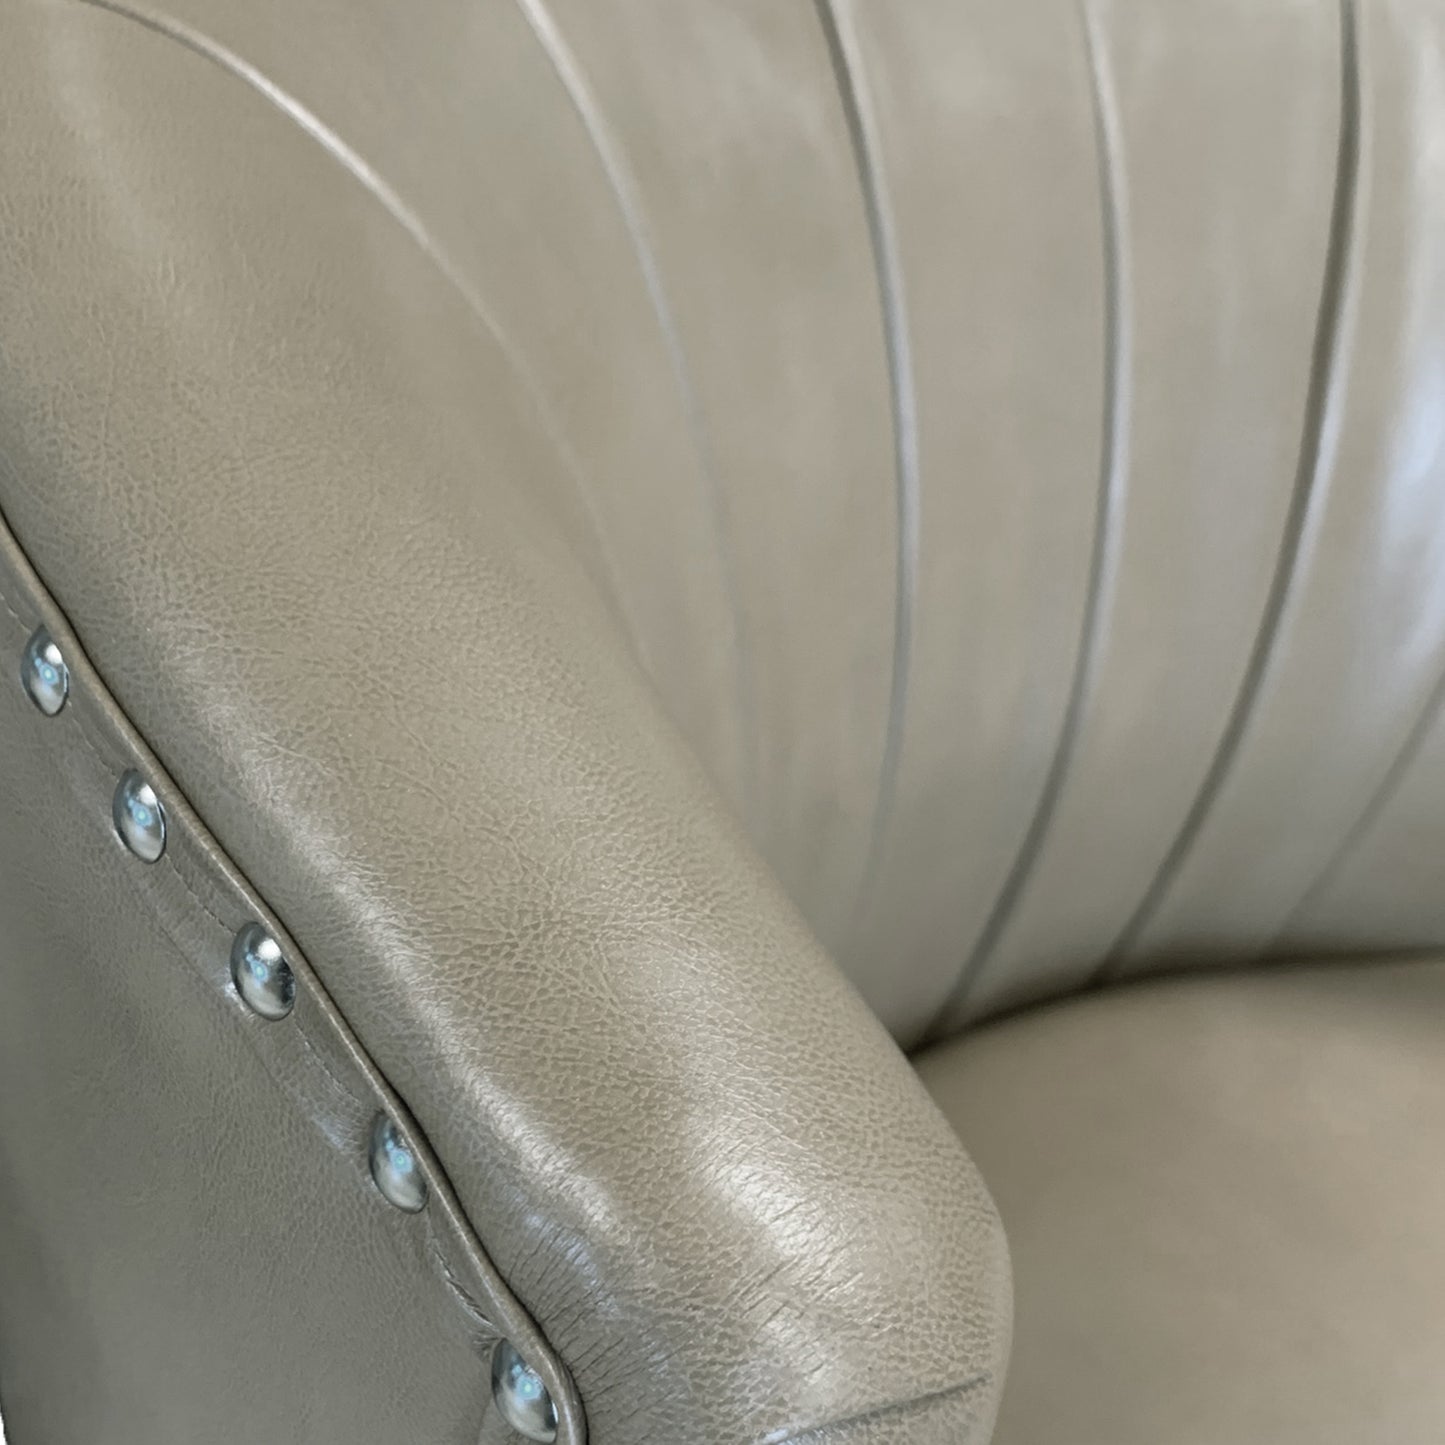 (KYRIE TAUPE)- LEATHER ACCENT CHAIR